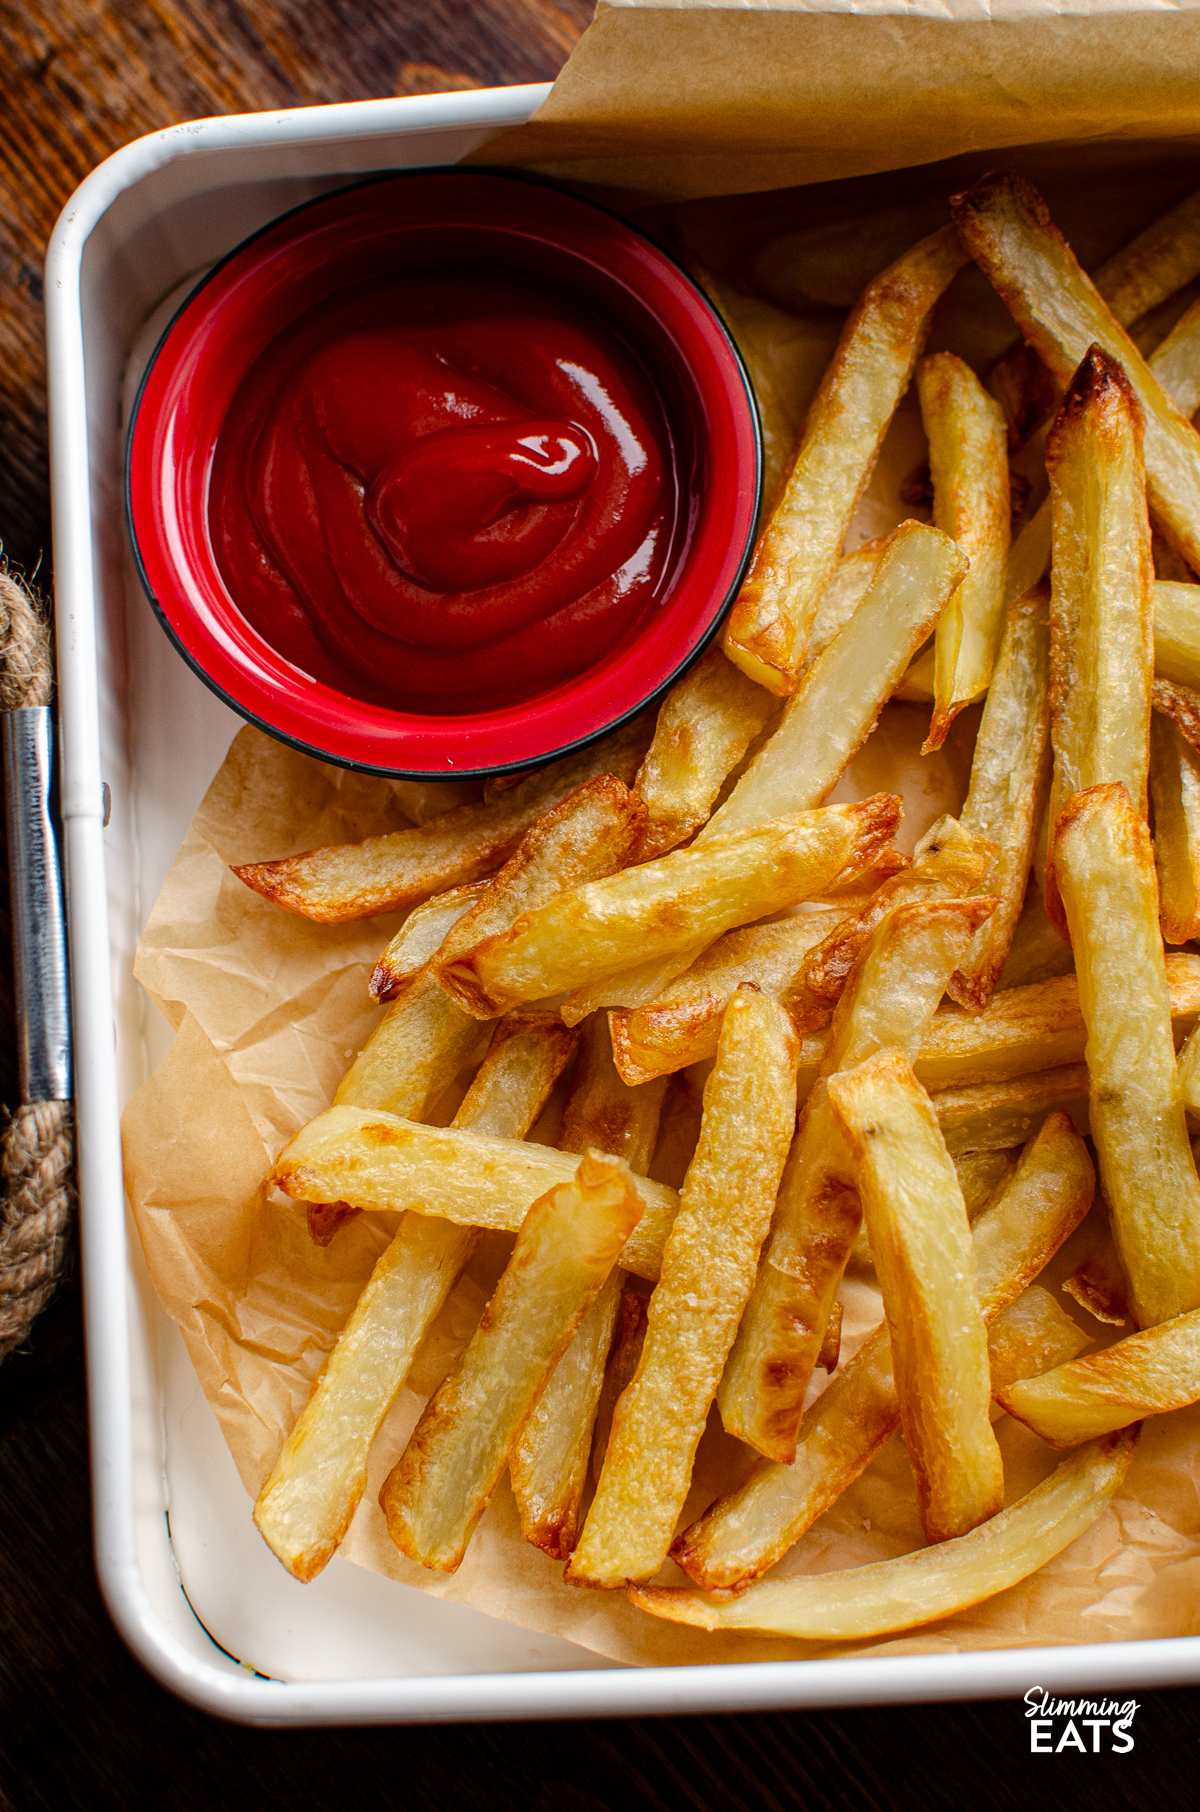 Golden oven baked fries arranged on parchment paper in a white tray with rope handles with a red dish with ketchup